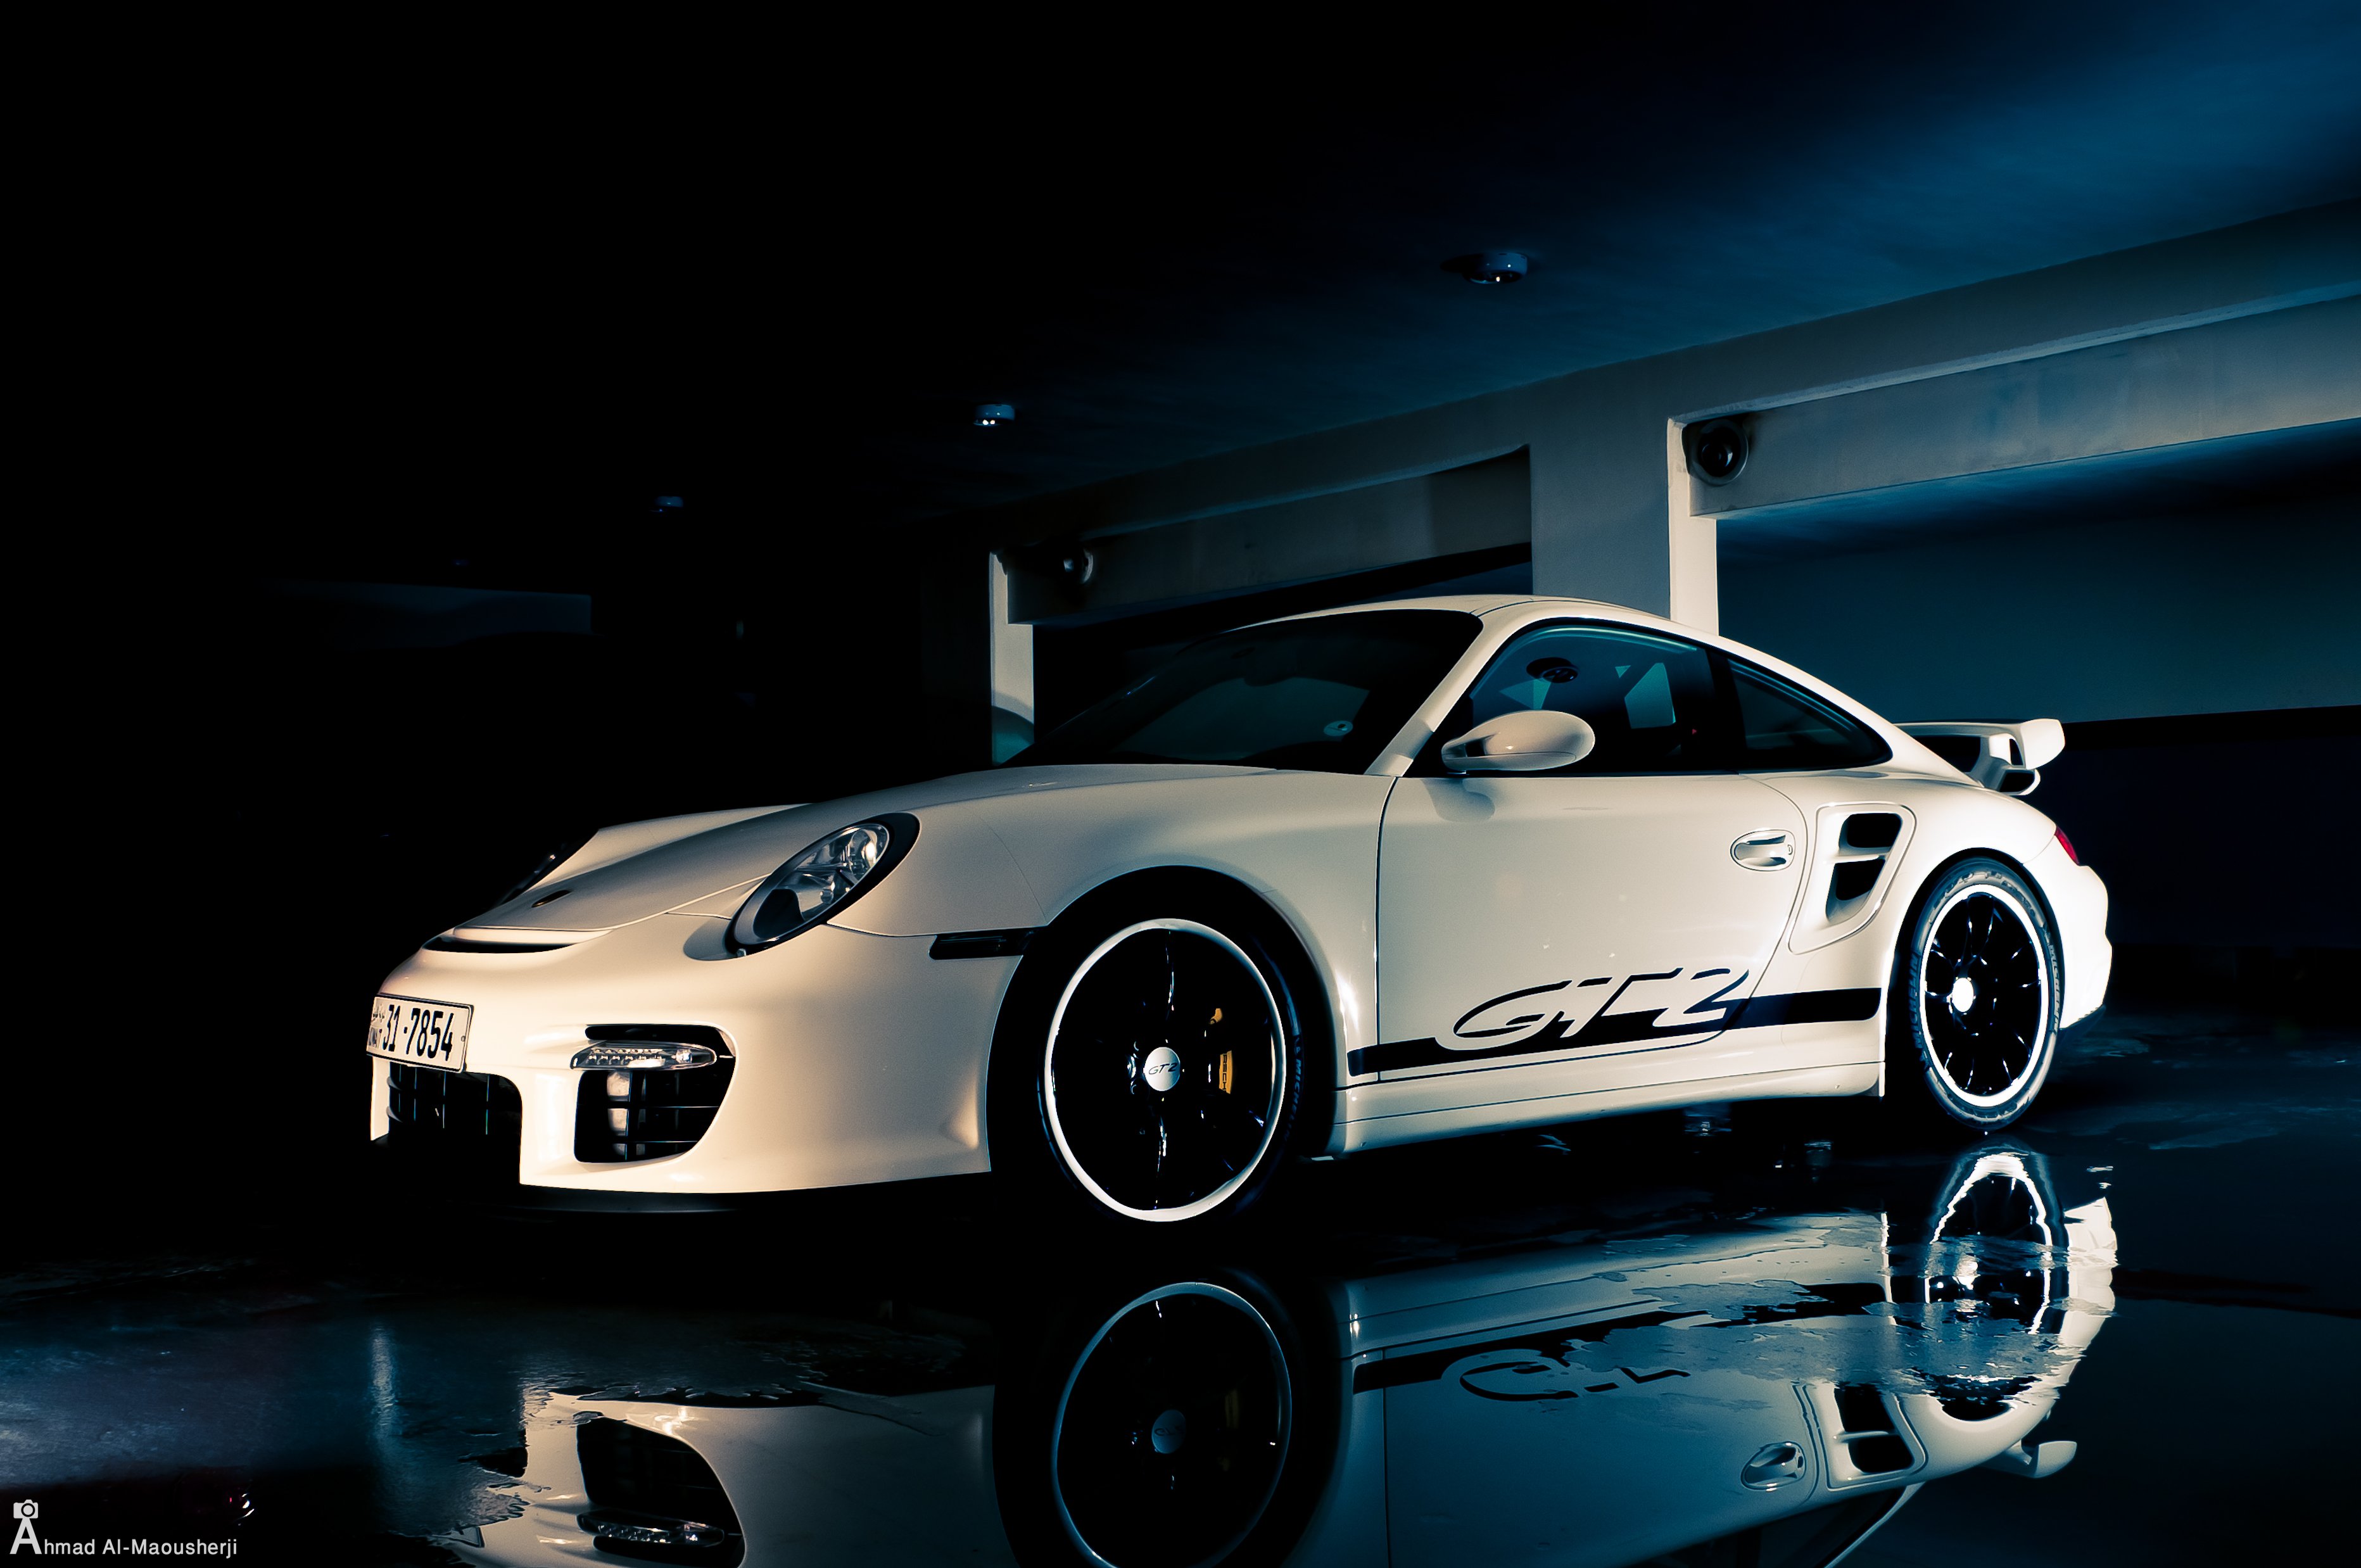 911, Cars, Coupe, Germany, Gt2, Gt2, Rs, Porsche, Blanc, White